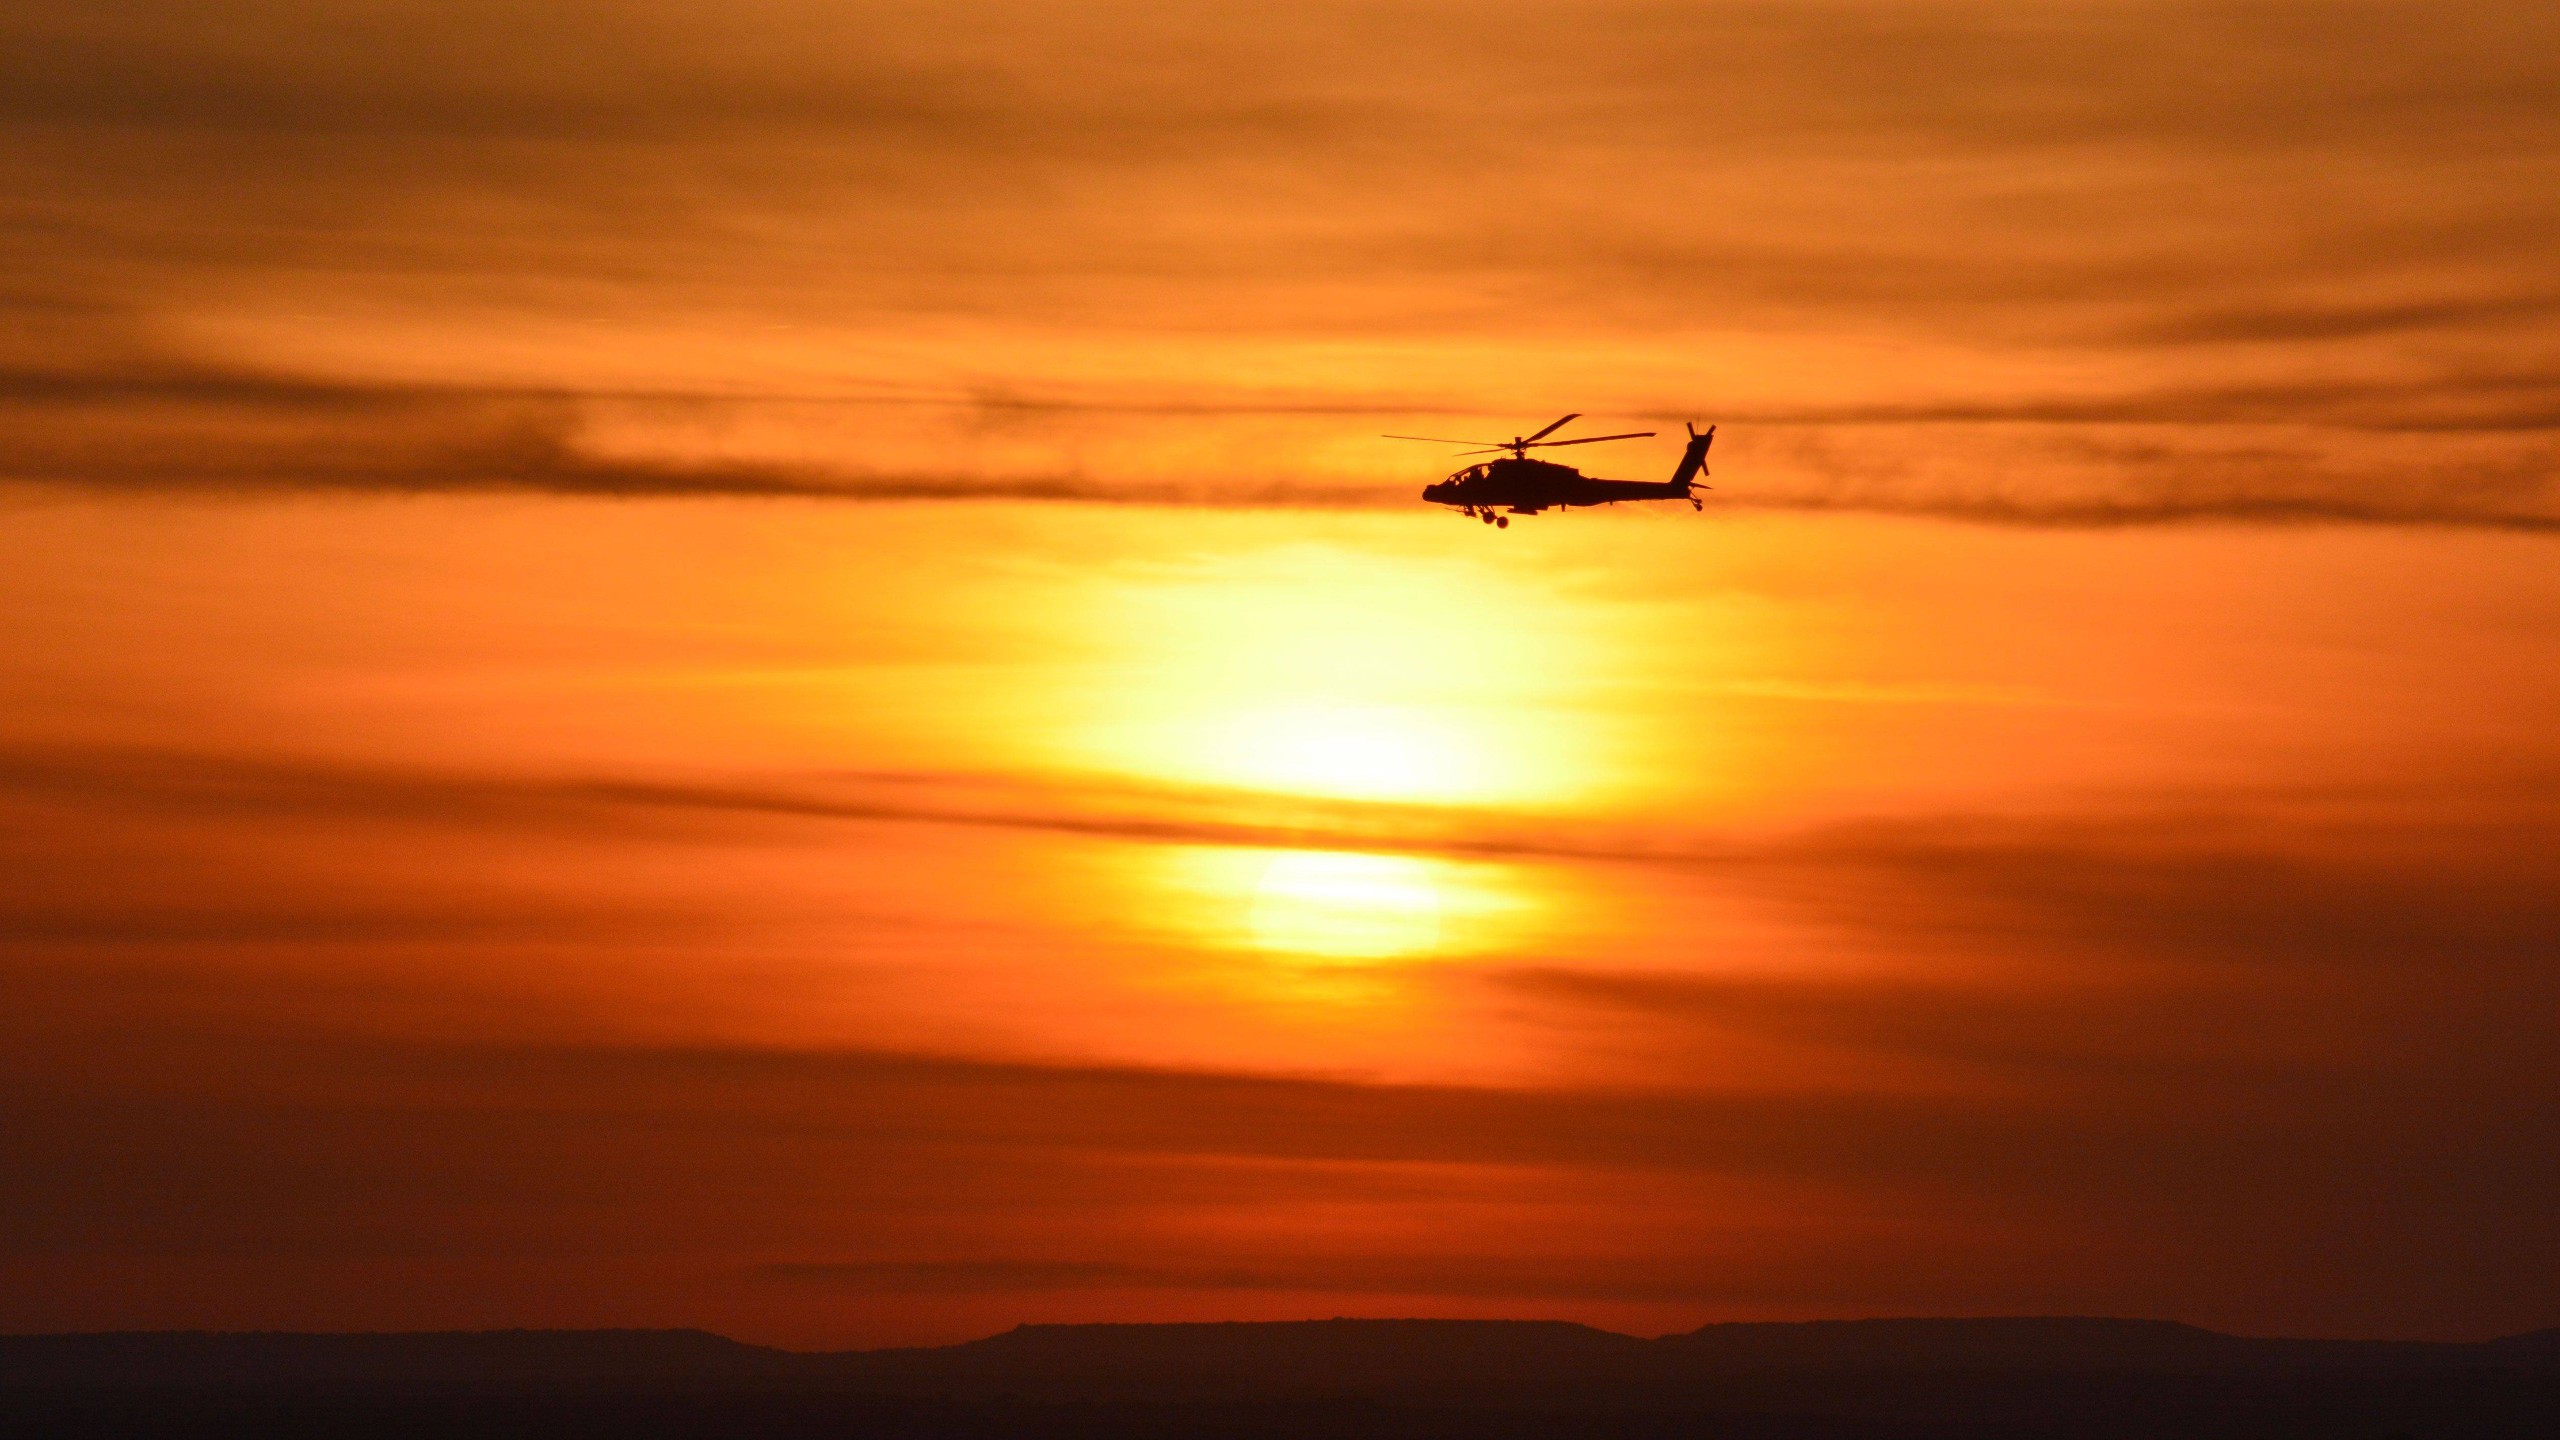 General 2560x1440 military aircraft military aircraft helicopters sunset Boeing AH-64 Apache orange sky sunlight military vehicle vehicle